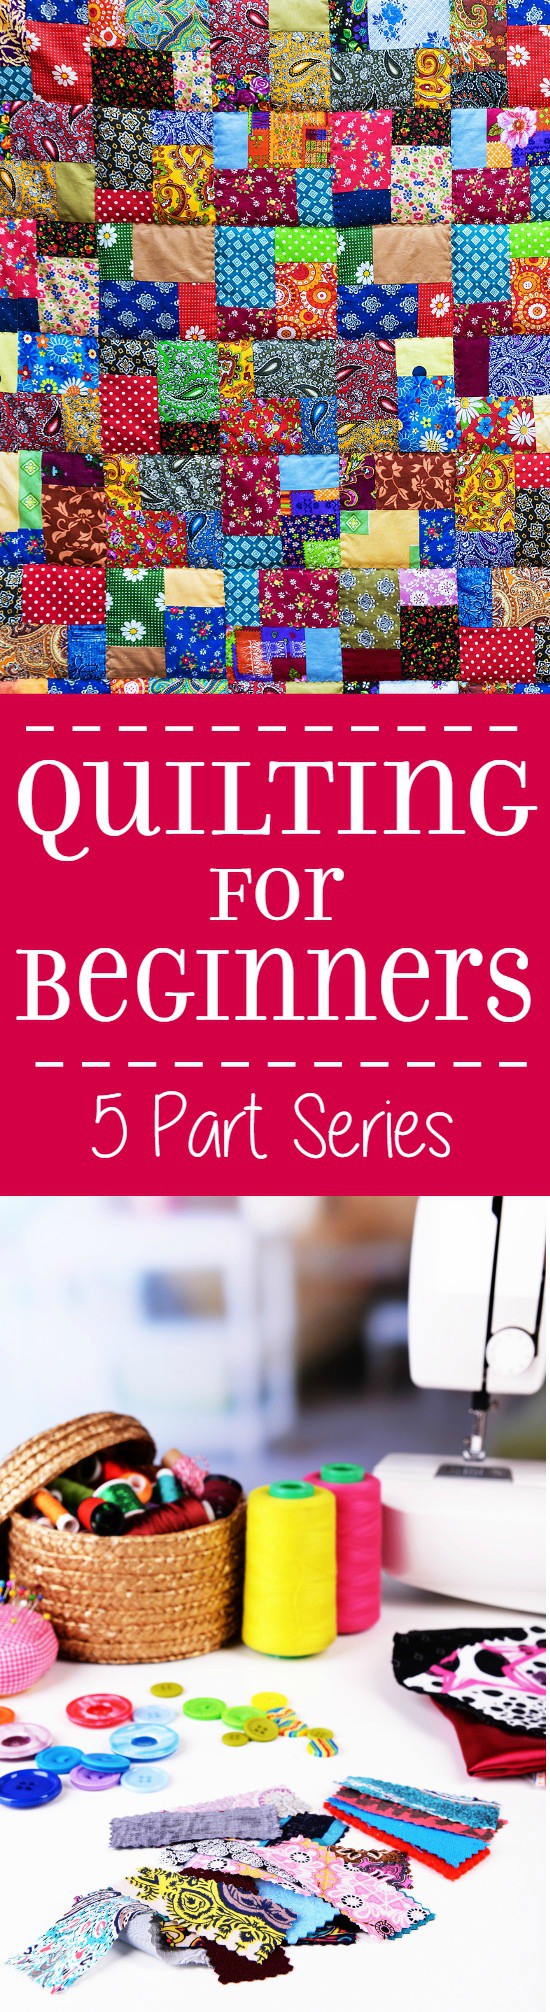 Quilting for Beginners: Make beautiful DIY quilts even if you're a quilting or sewing newbie. A tutorial and tip guide for making a quilt from start to finish. Quilting for Beginners teaches newbies how to quilt from the basics, start to finish. This 5 part series walks you through each step of quilt making. 